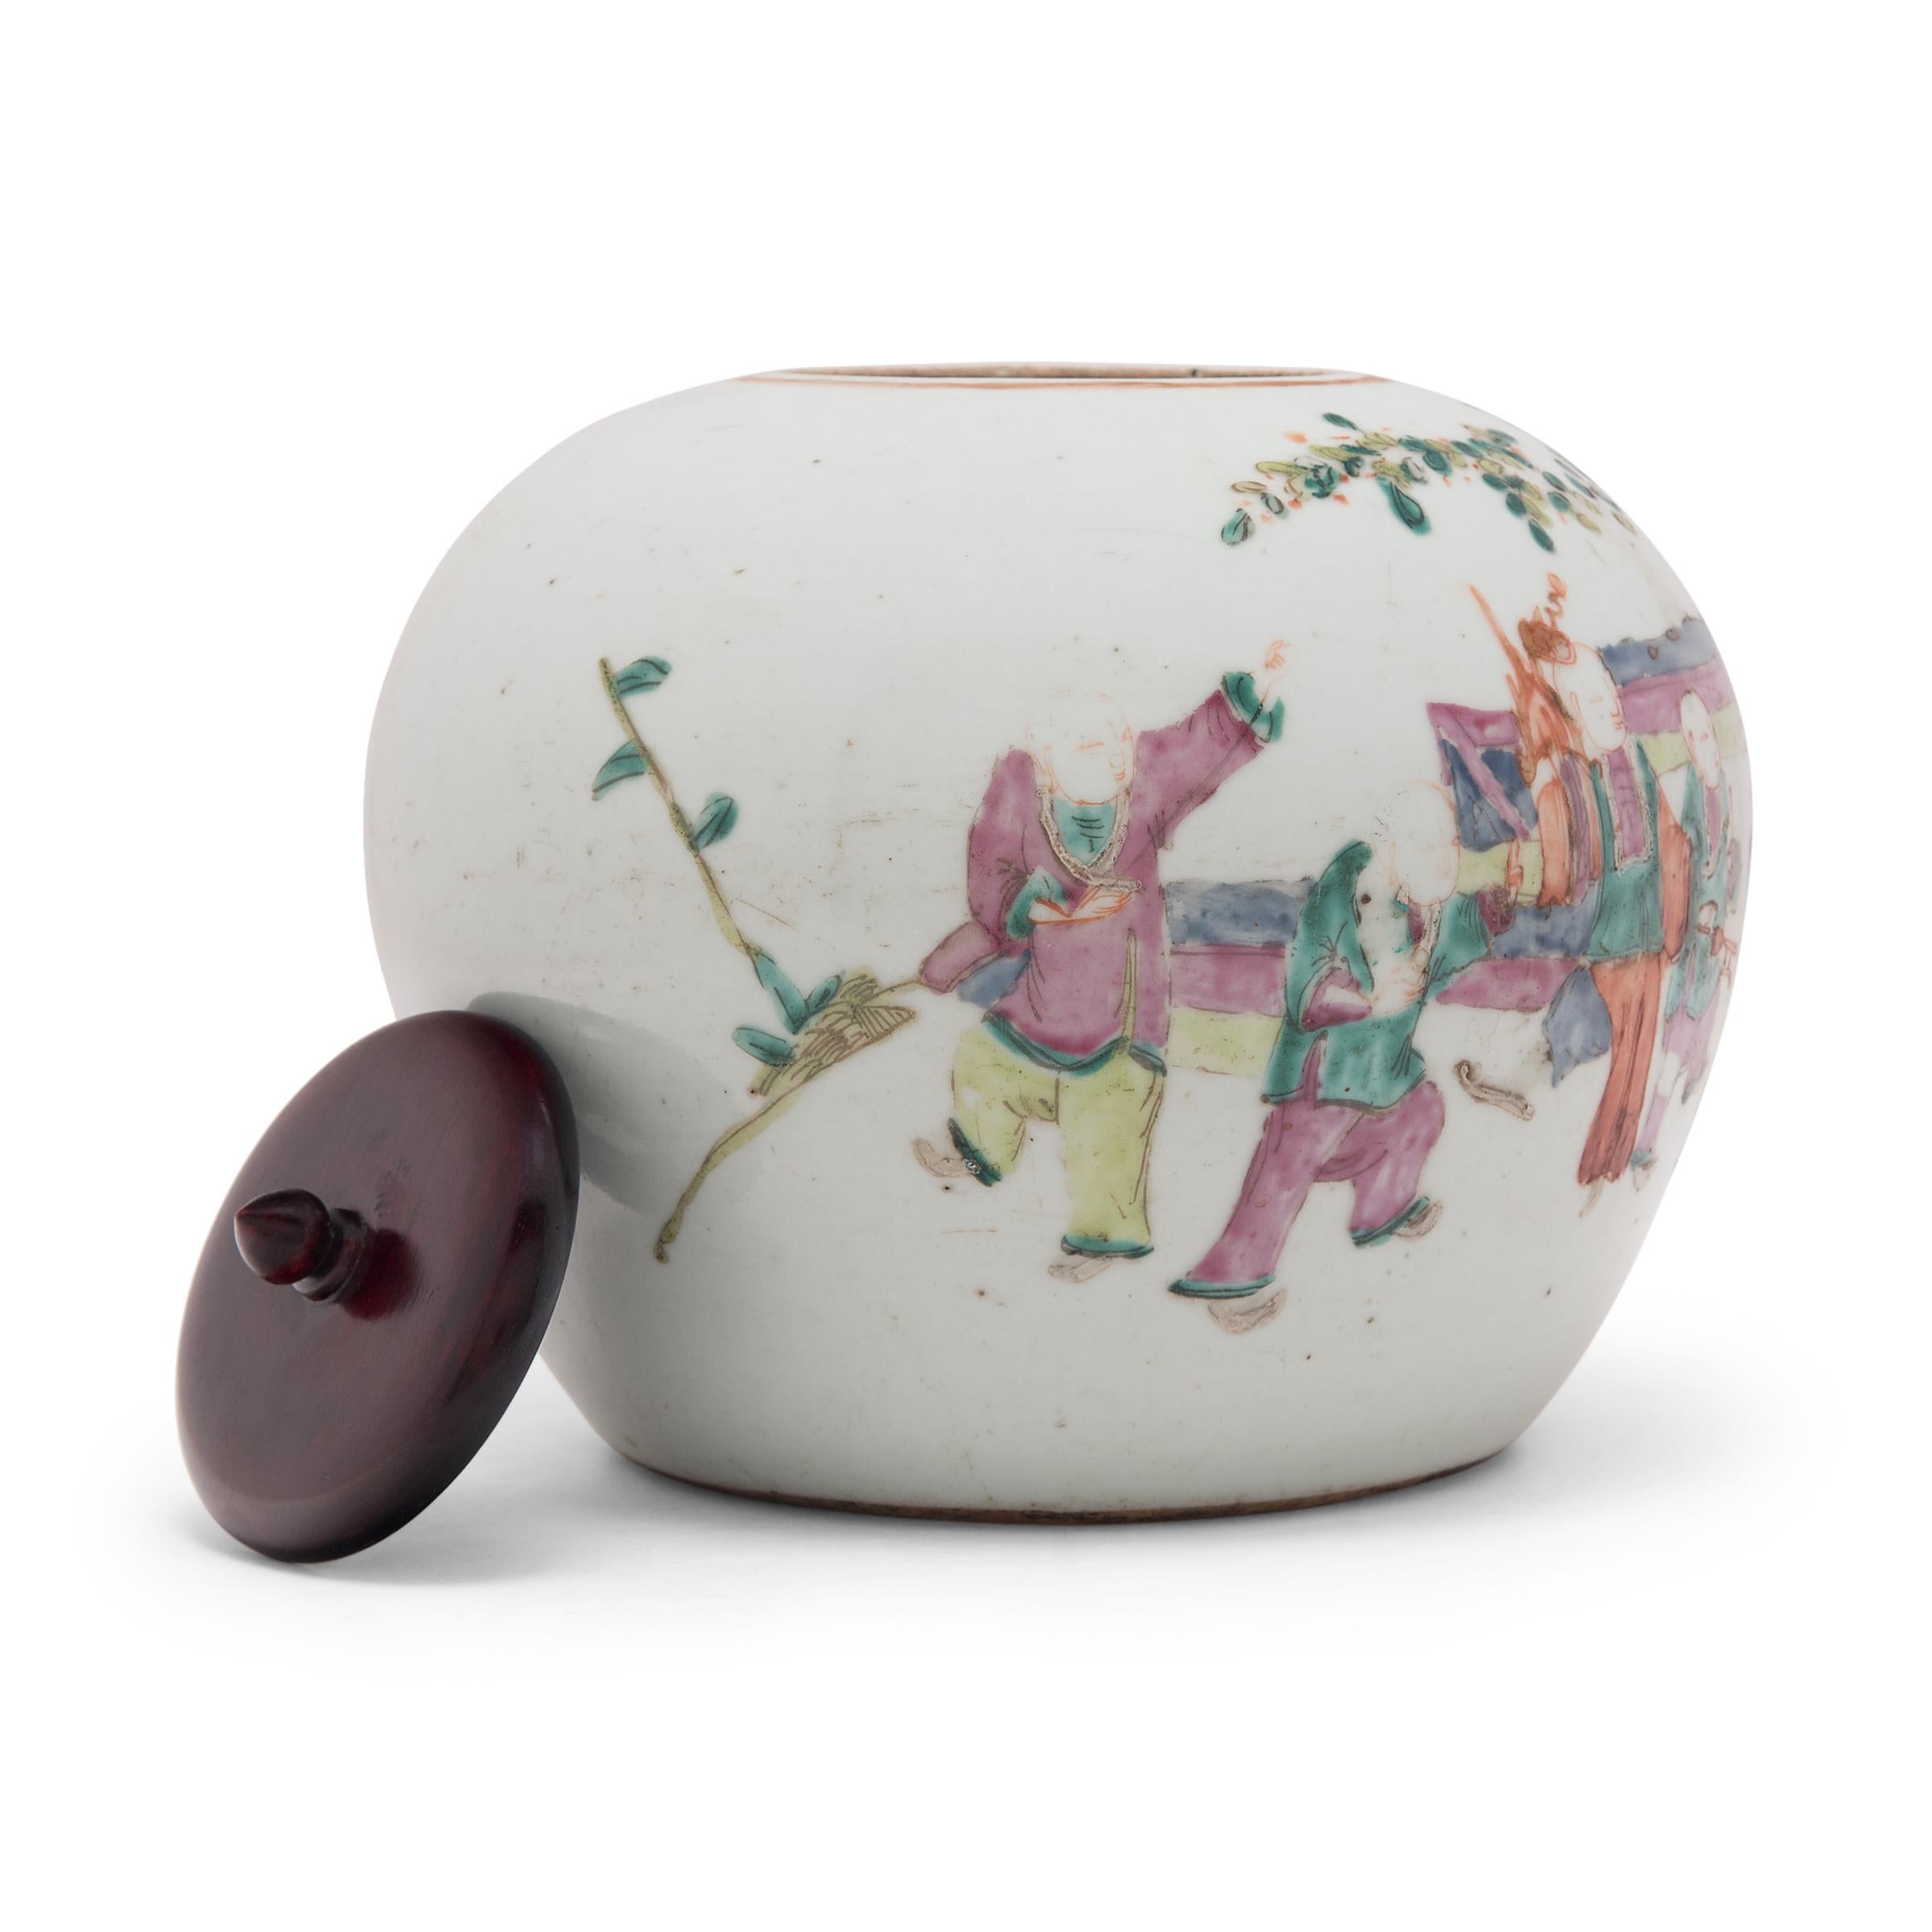 20th Century Chinese Famille Rose Ginger Jar with Boys at Play, C. 1900